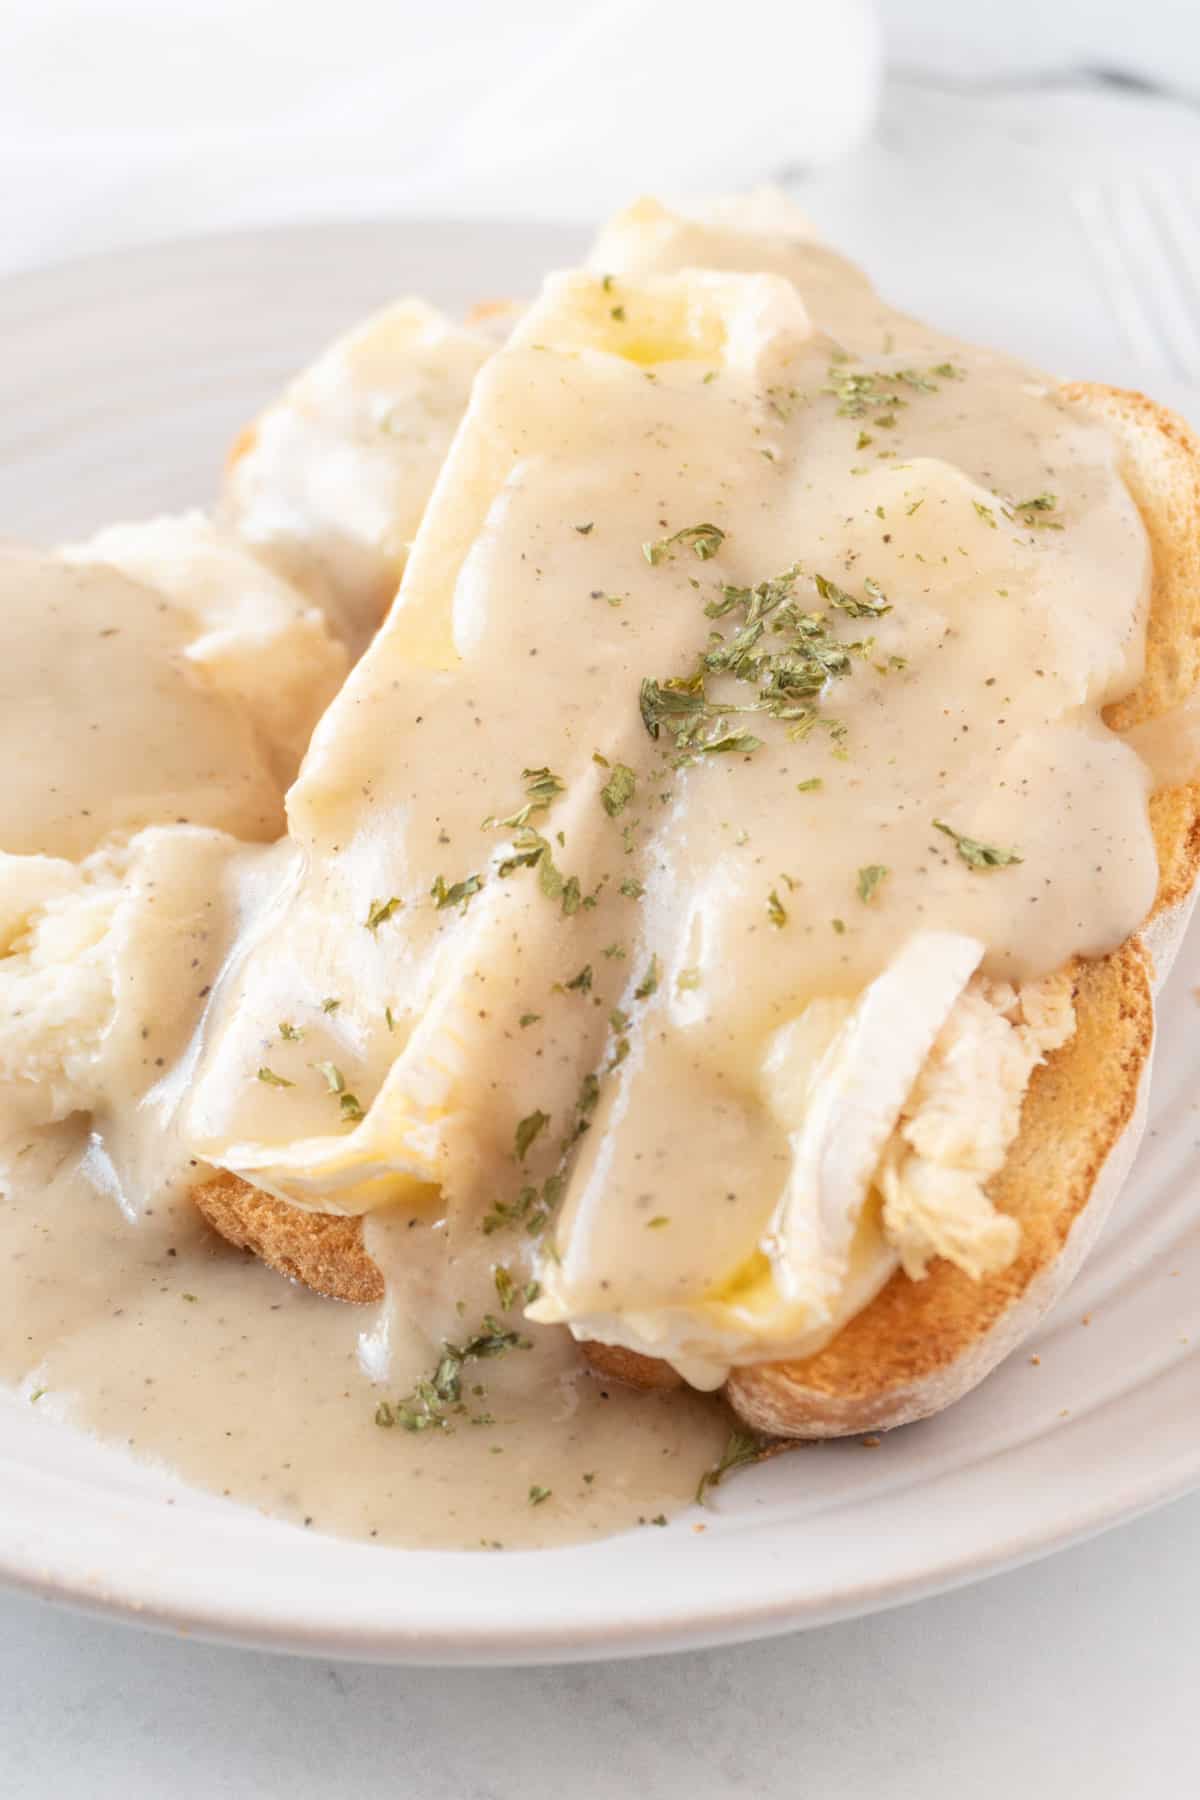 open faced turkey sandwich with brie and gravy